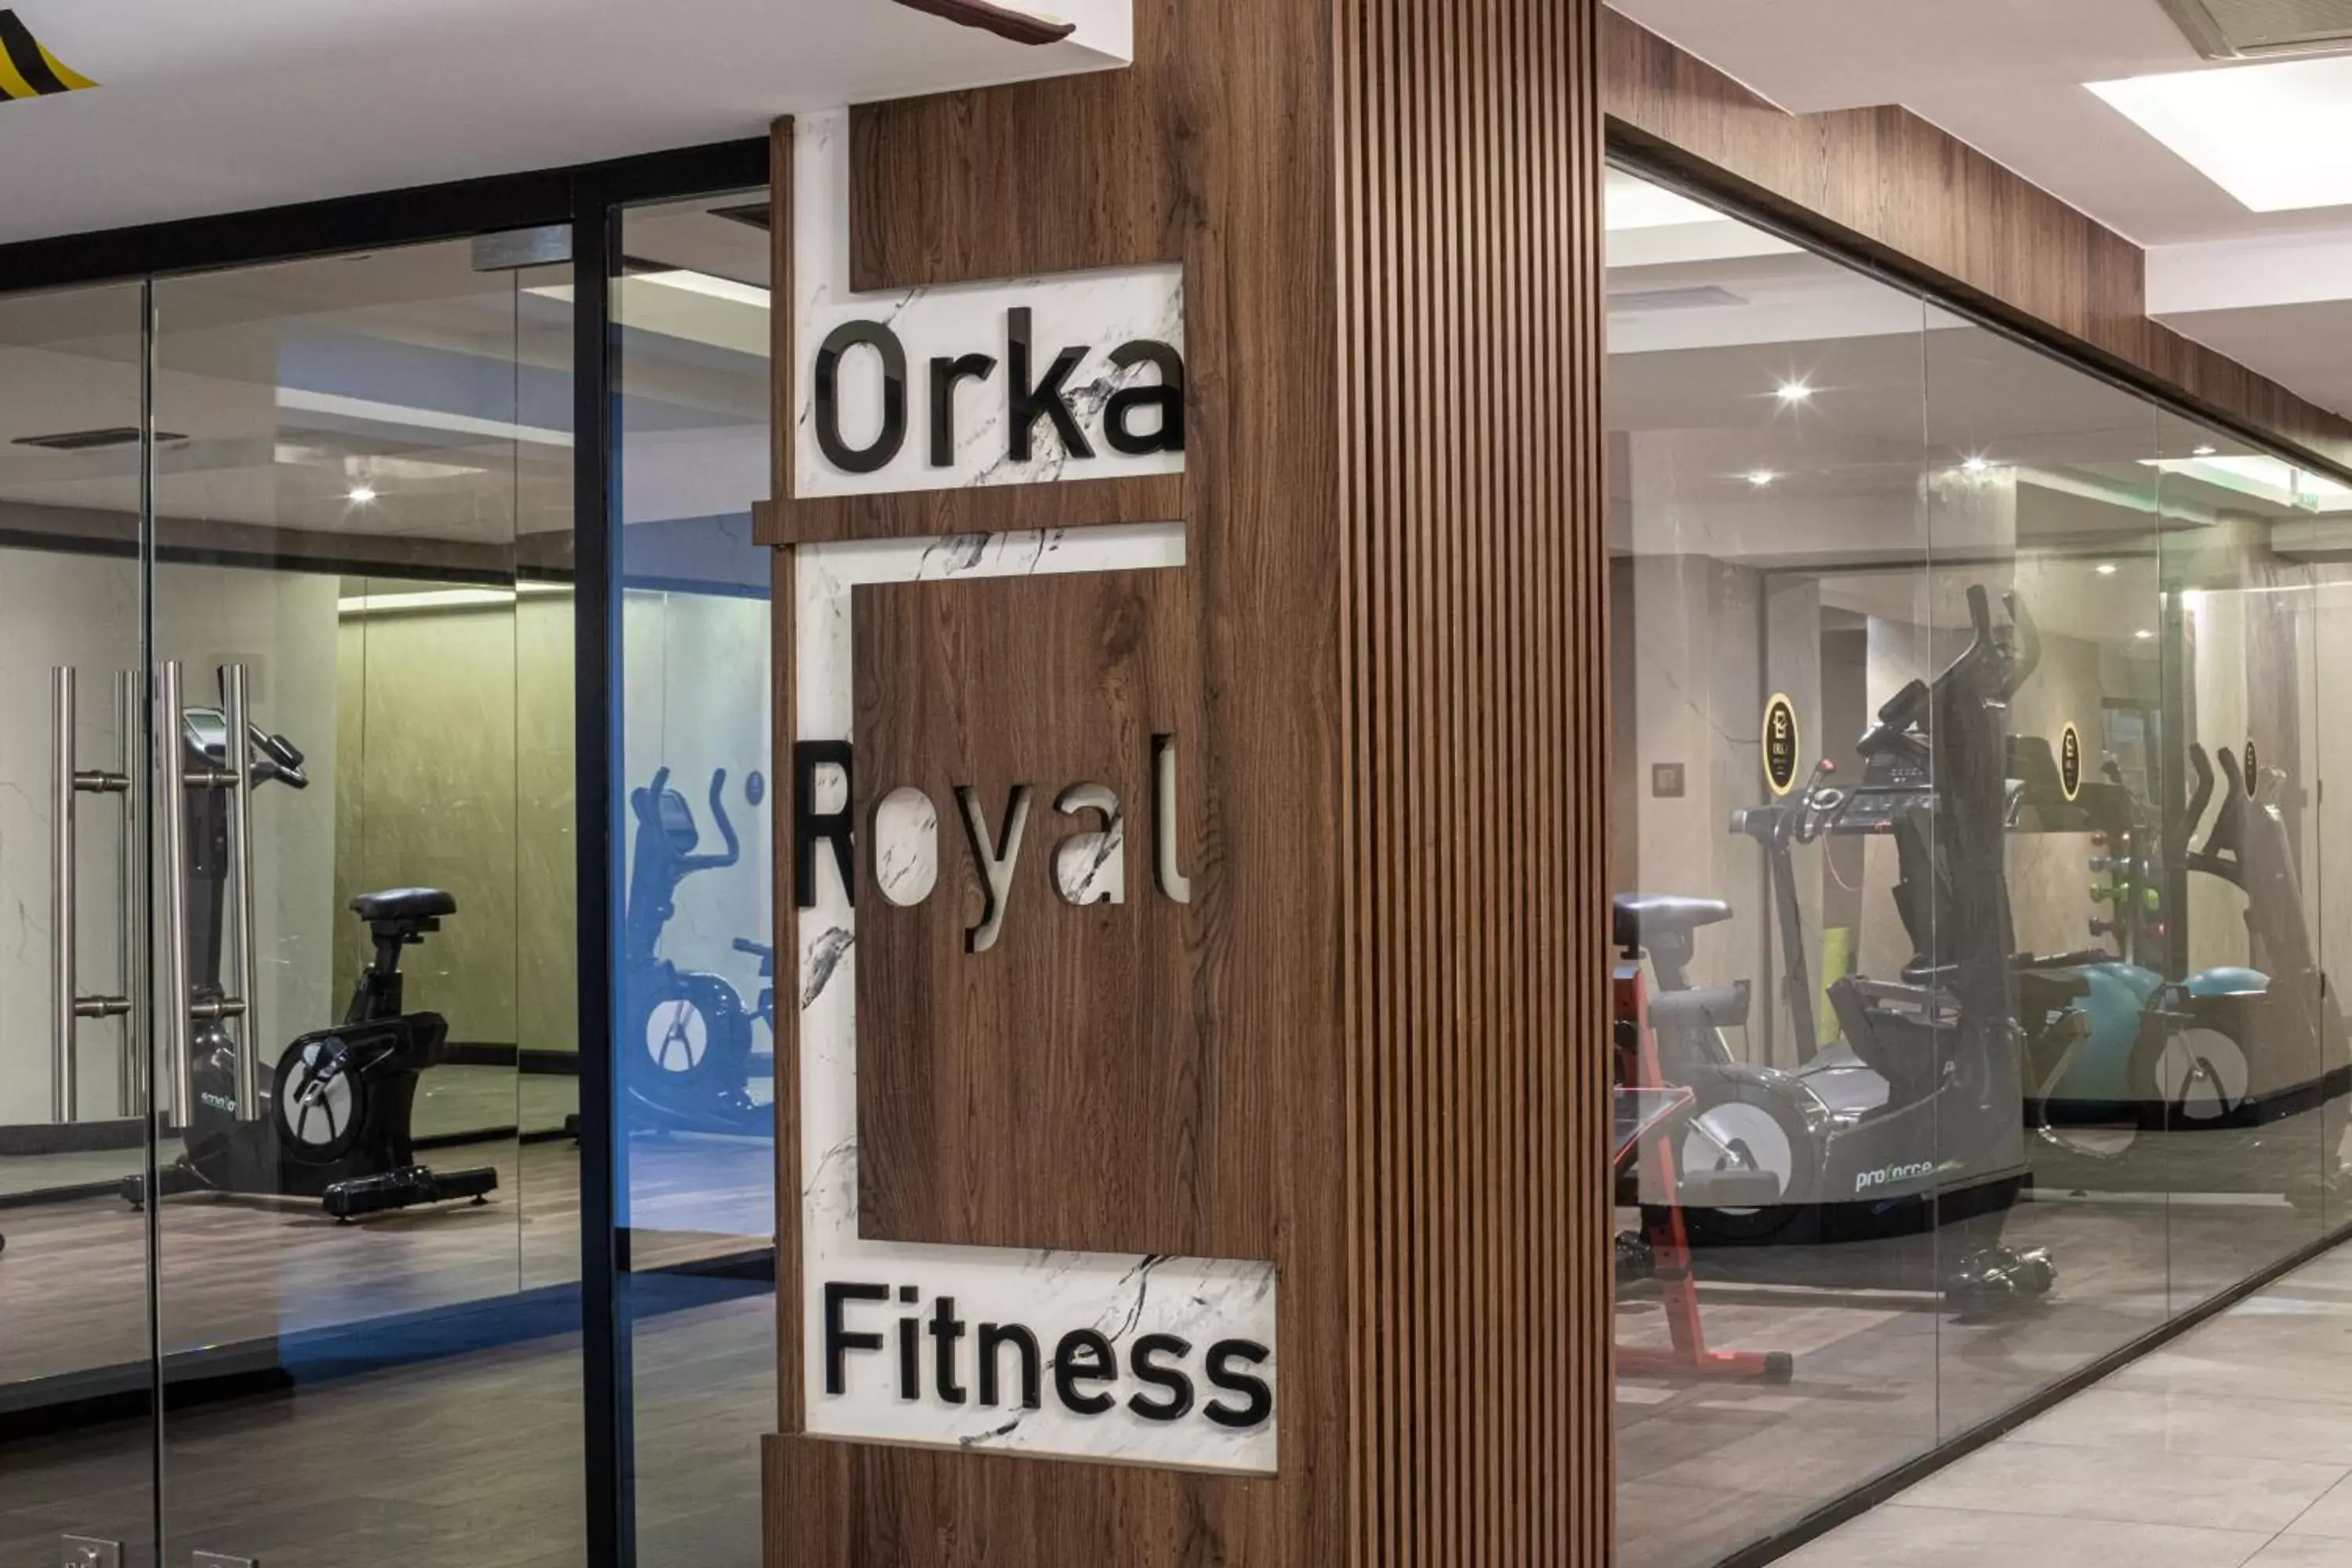 Fitness centre/facilities in Orka Royal Hotel & Spa